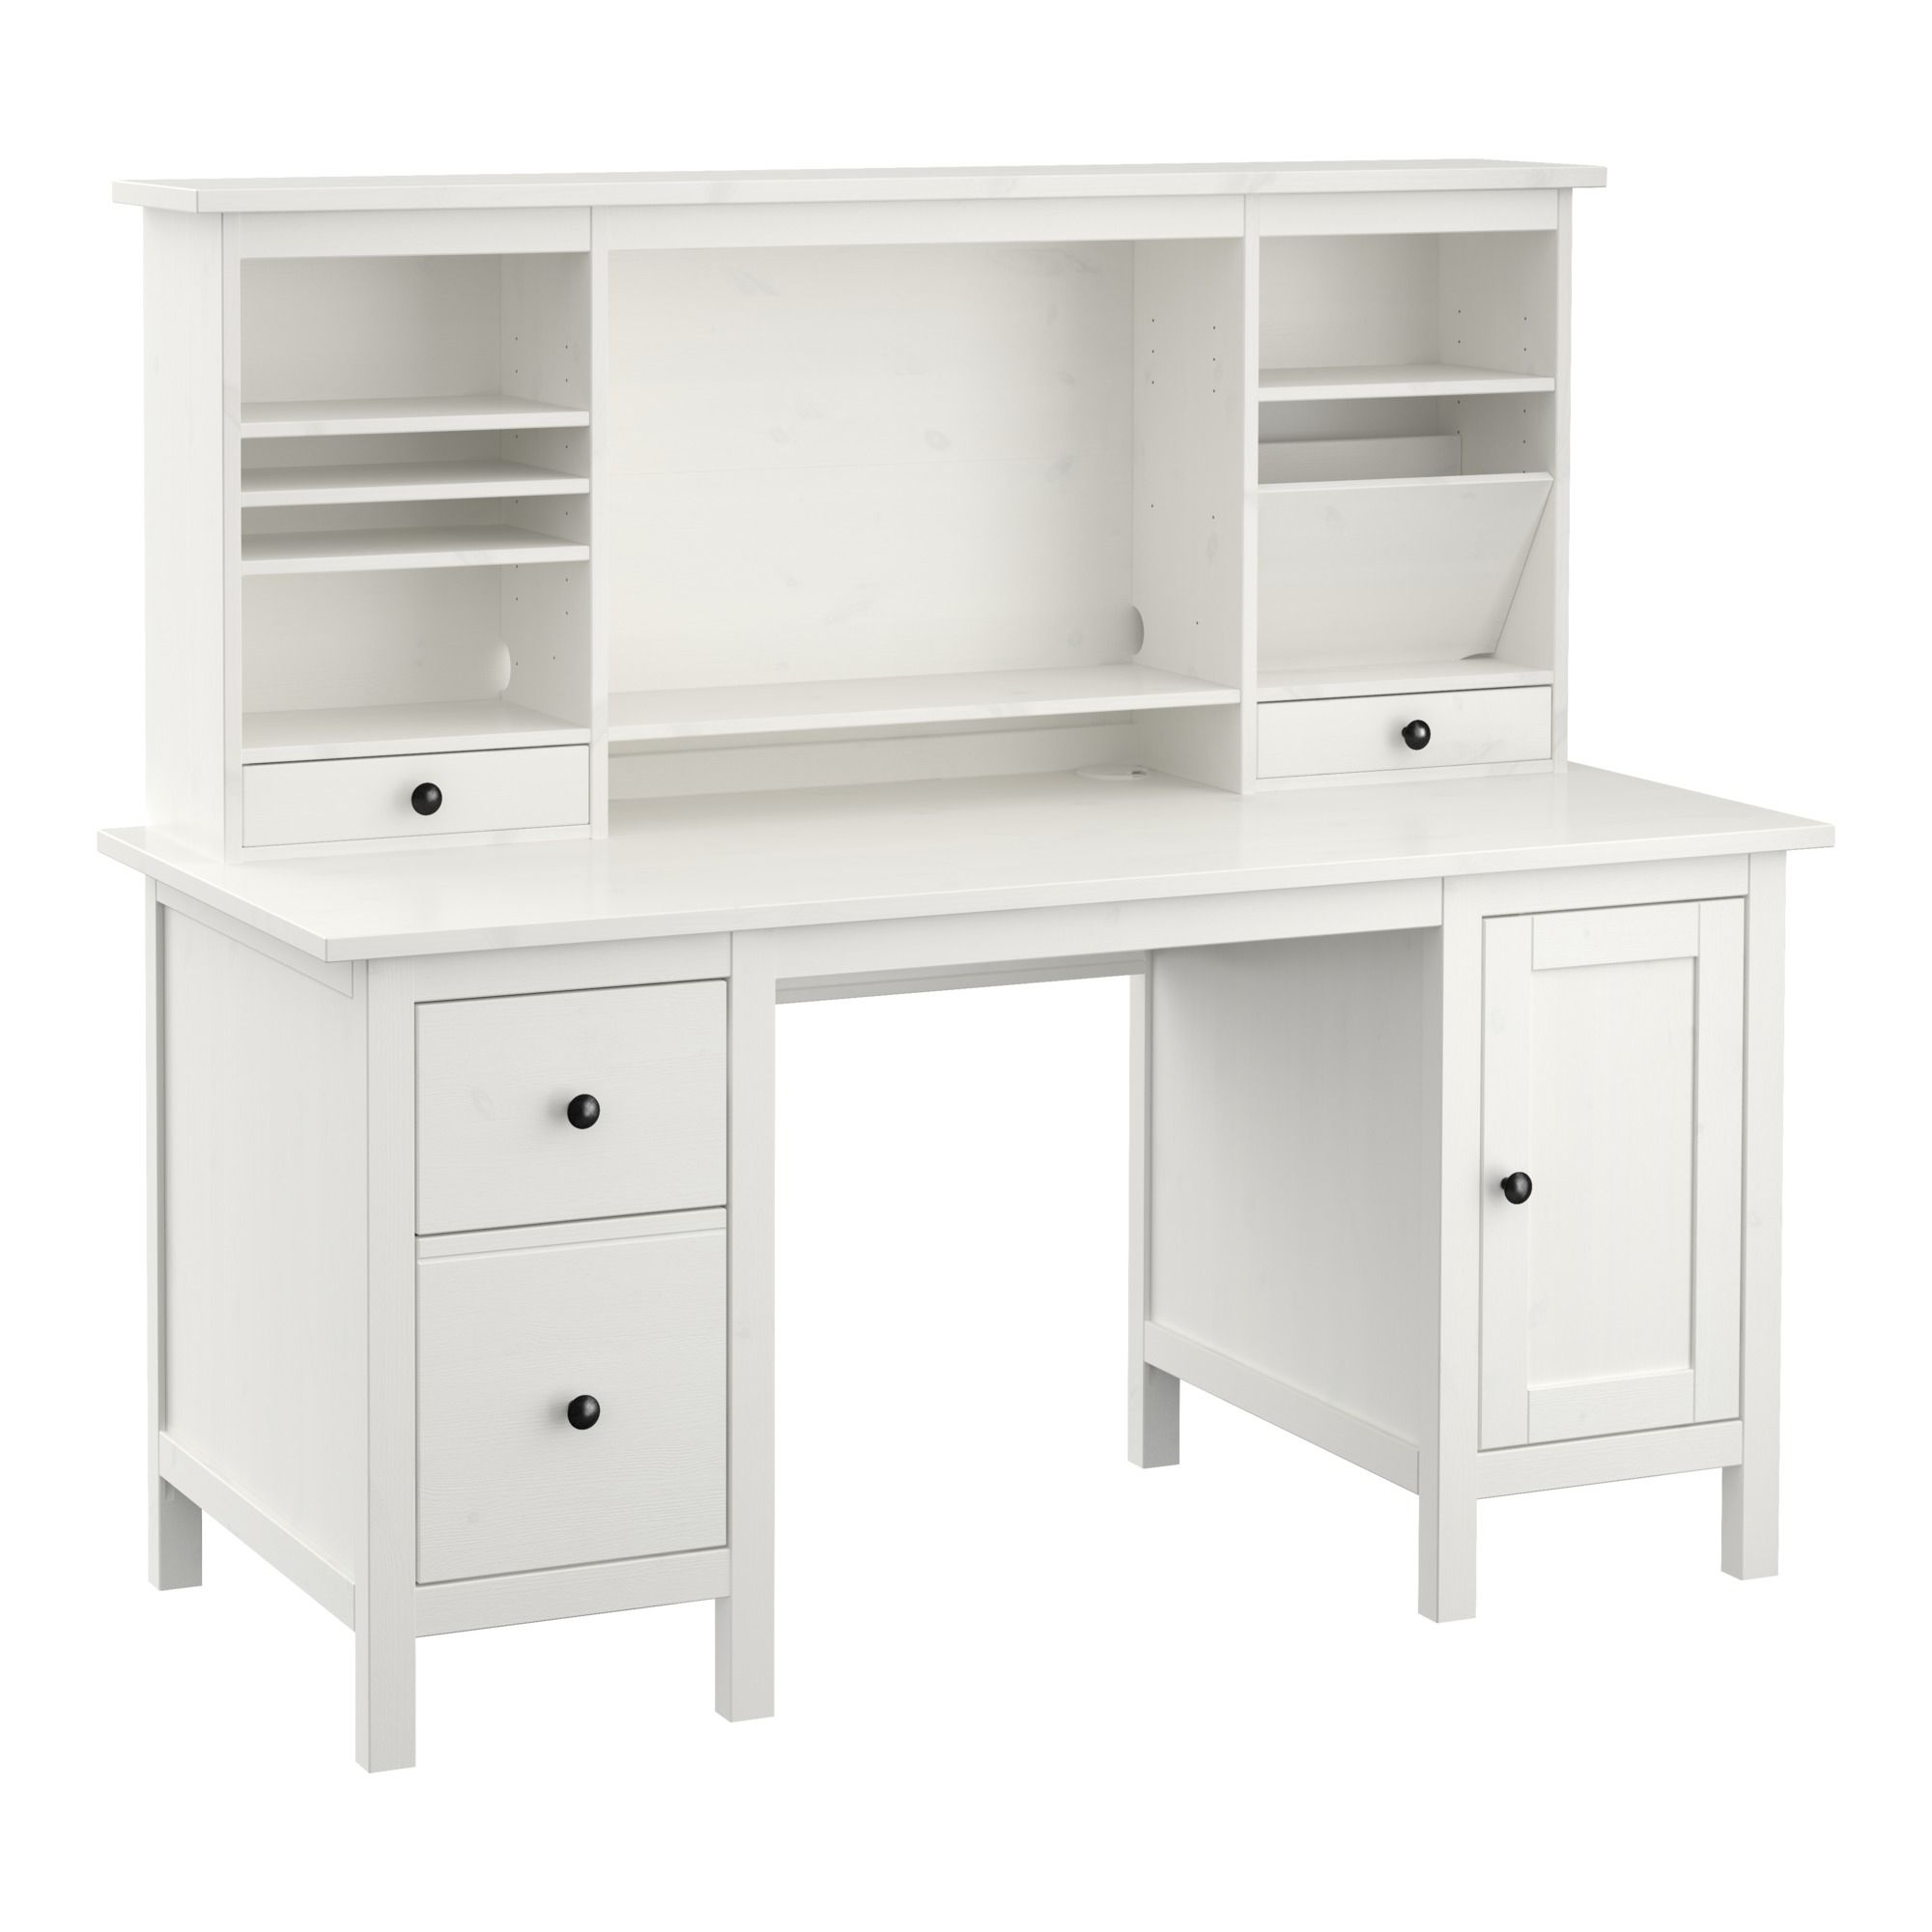 Hemnes Desk With Add On Unit – White Stain – Ikea With Regard To Newest White Computer Desks (View 1 of 20)